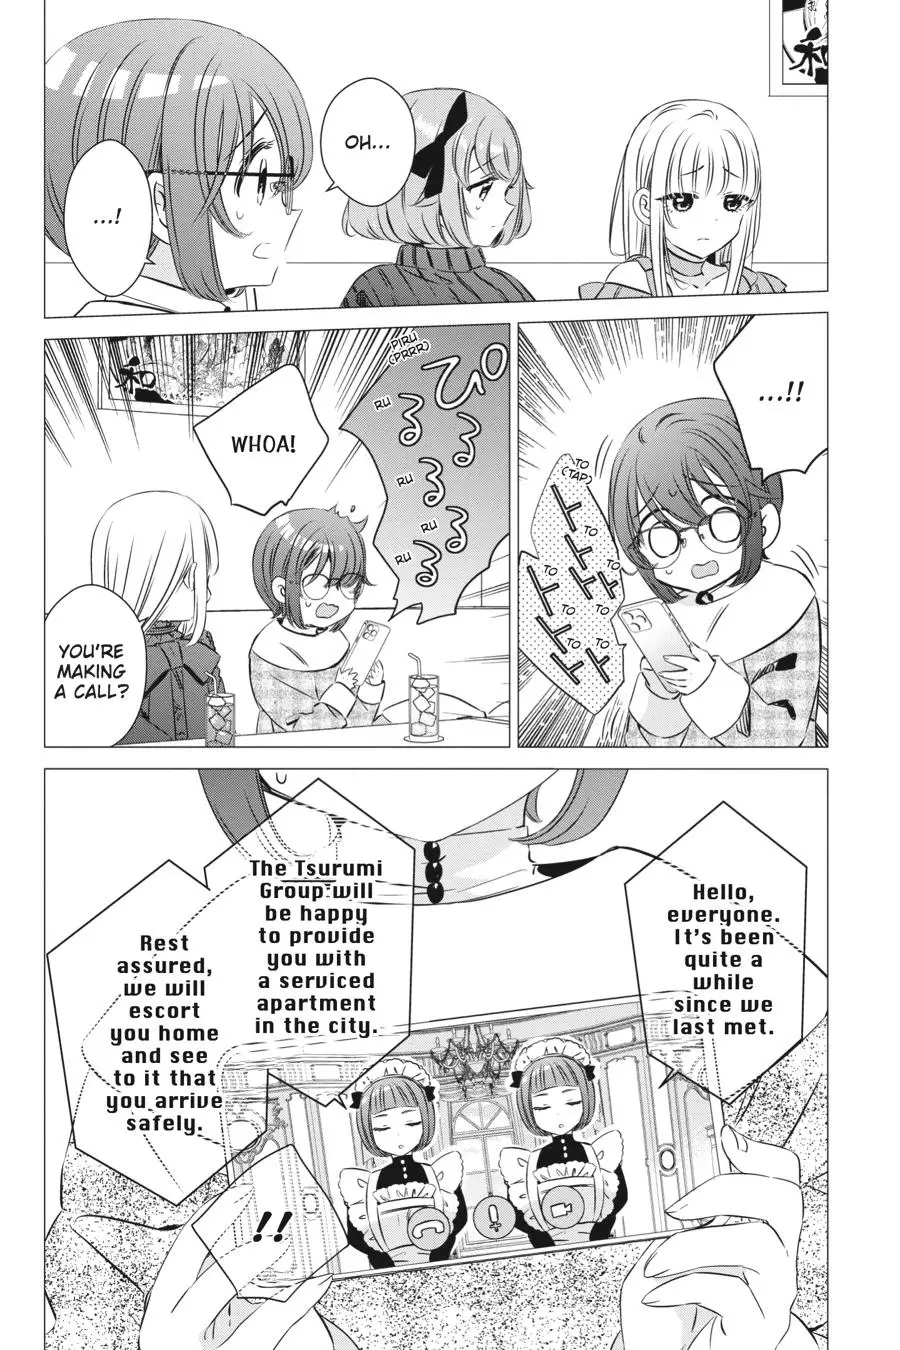 Studio Apartment, Good Lighting, Angel Included. - 26 page 10-e936d7df